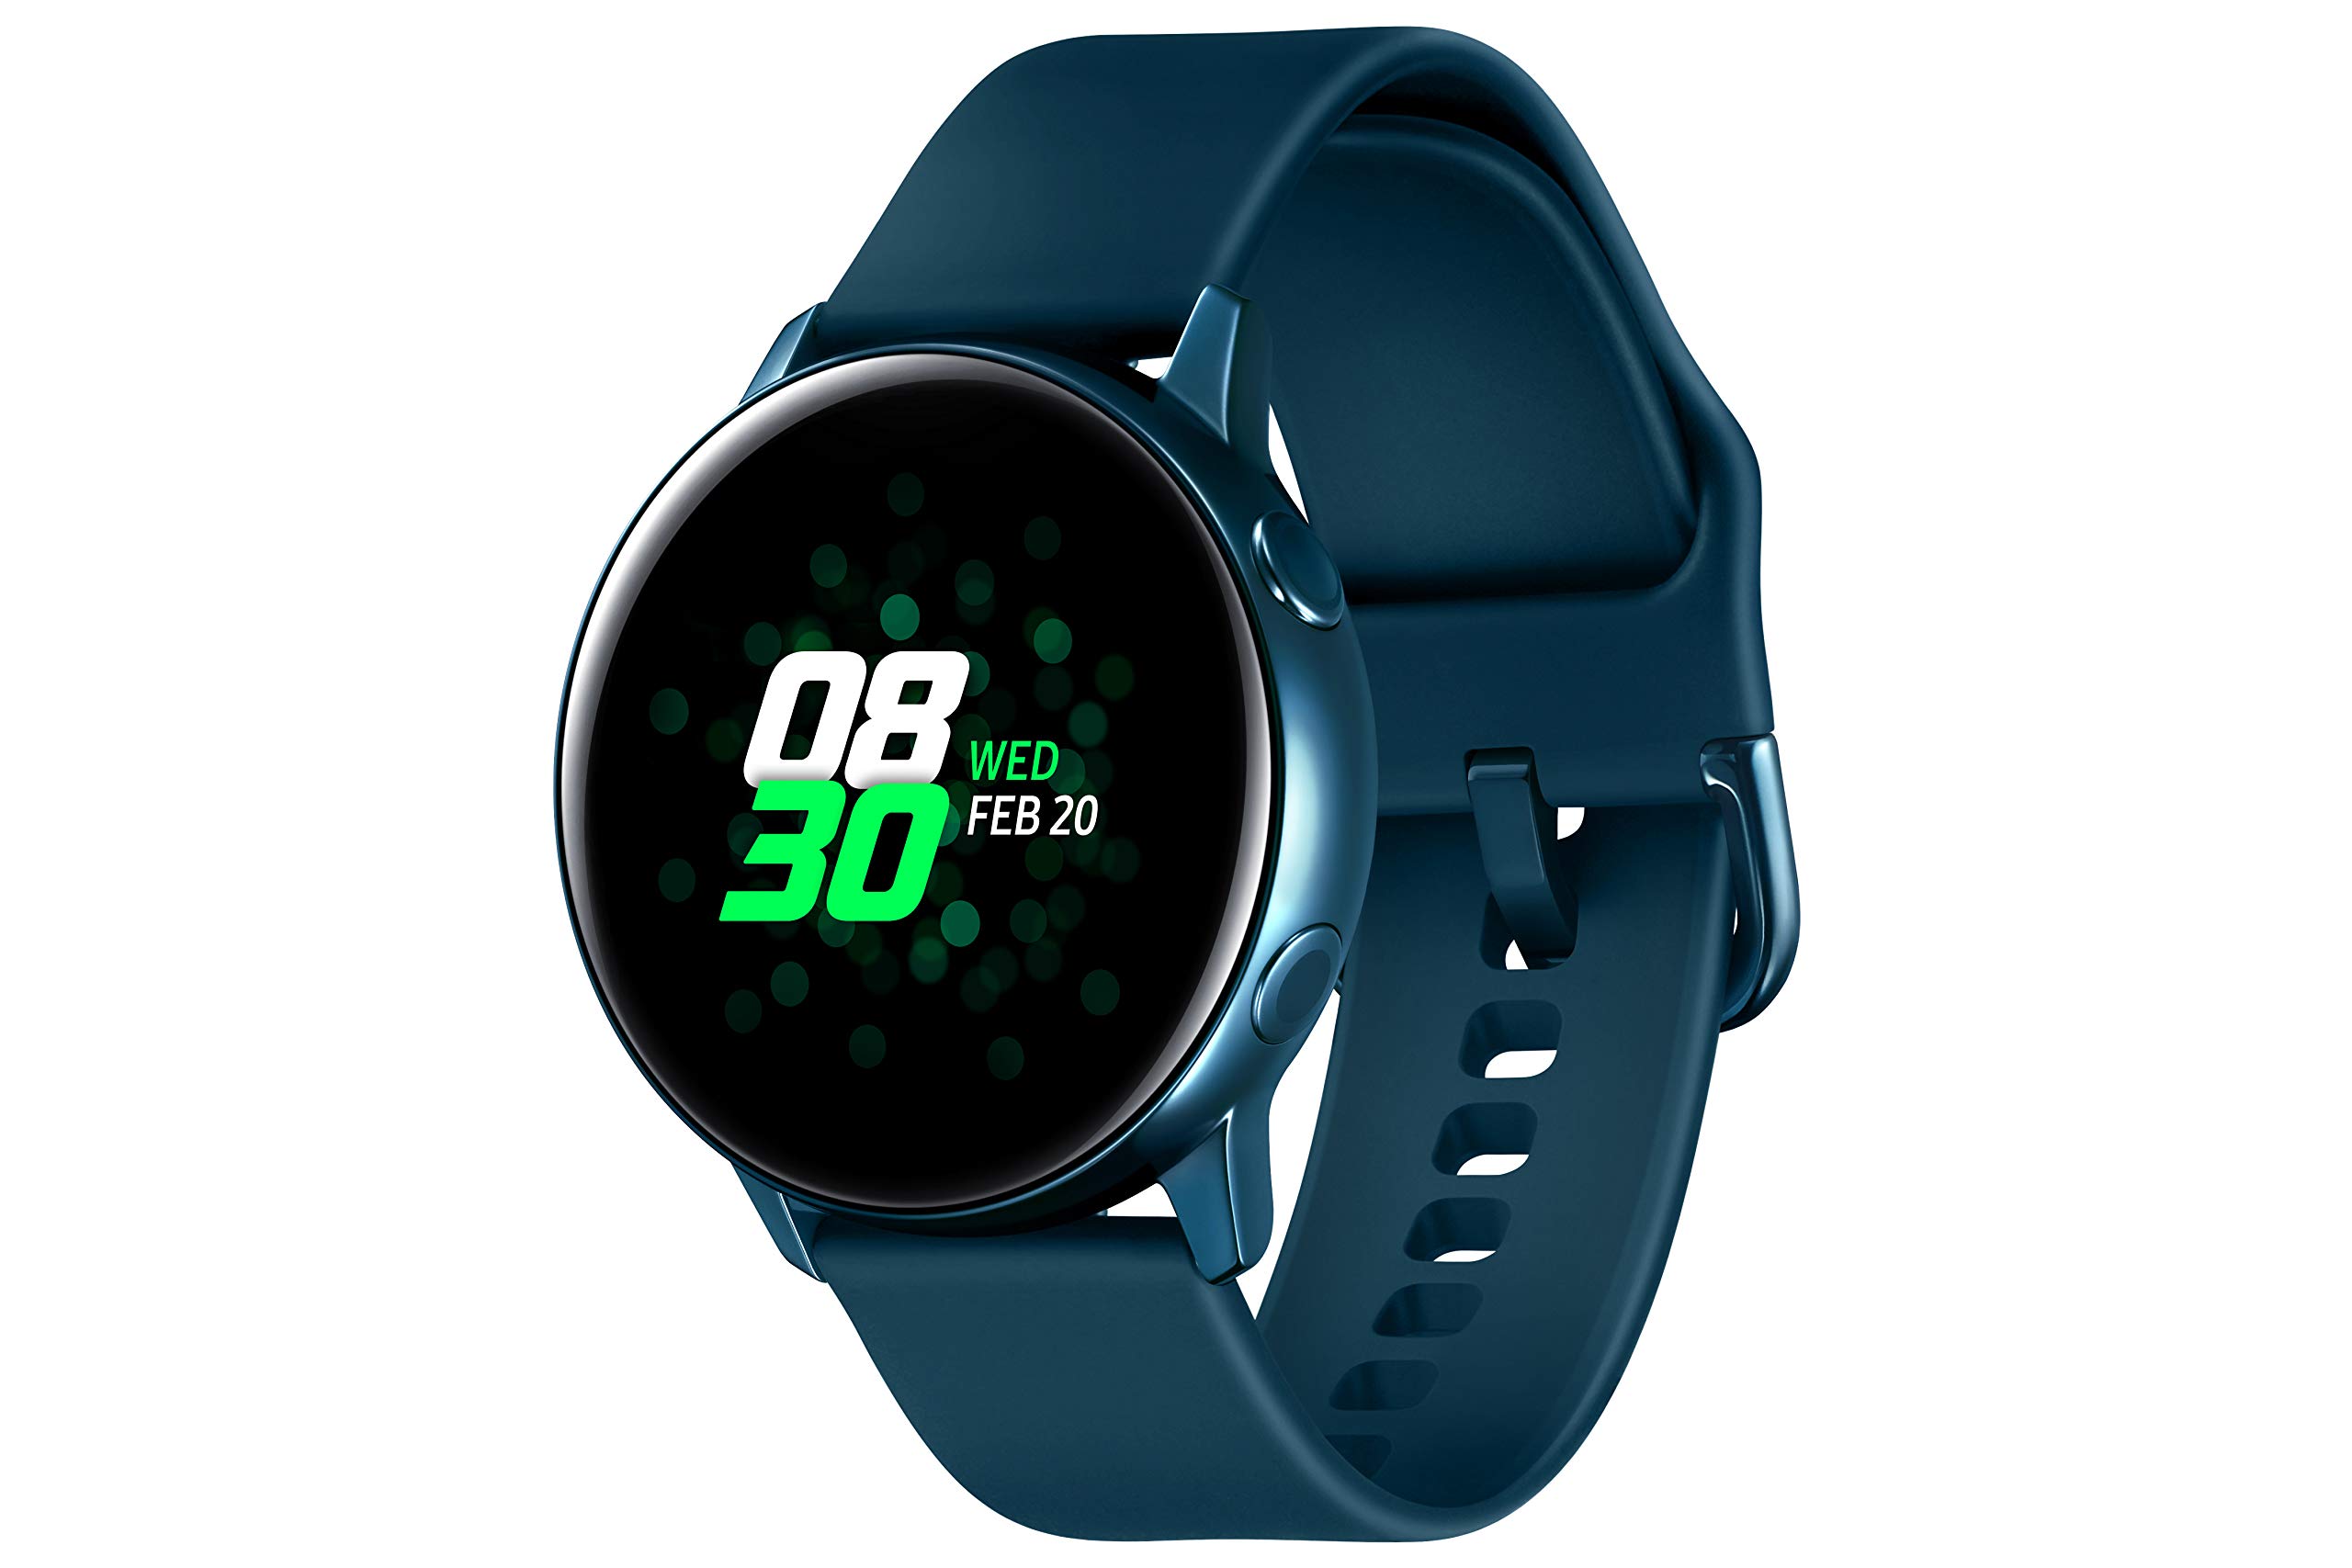 SAMSUNG Galaxy Watch Active (40MM, GPS, Bluetooth) Smart Watch with Fitness Tracking, and Sleep Analysis - Green - (US Version)